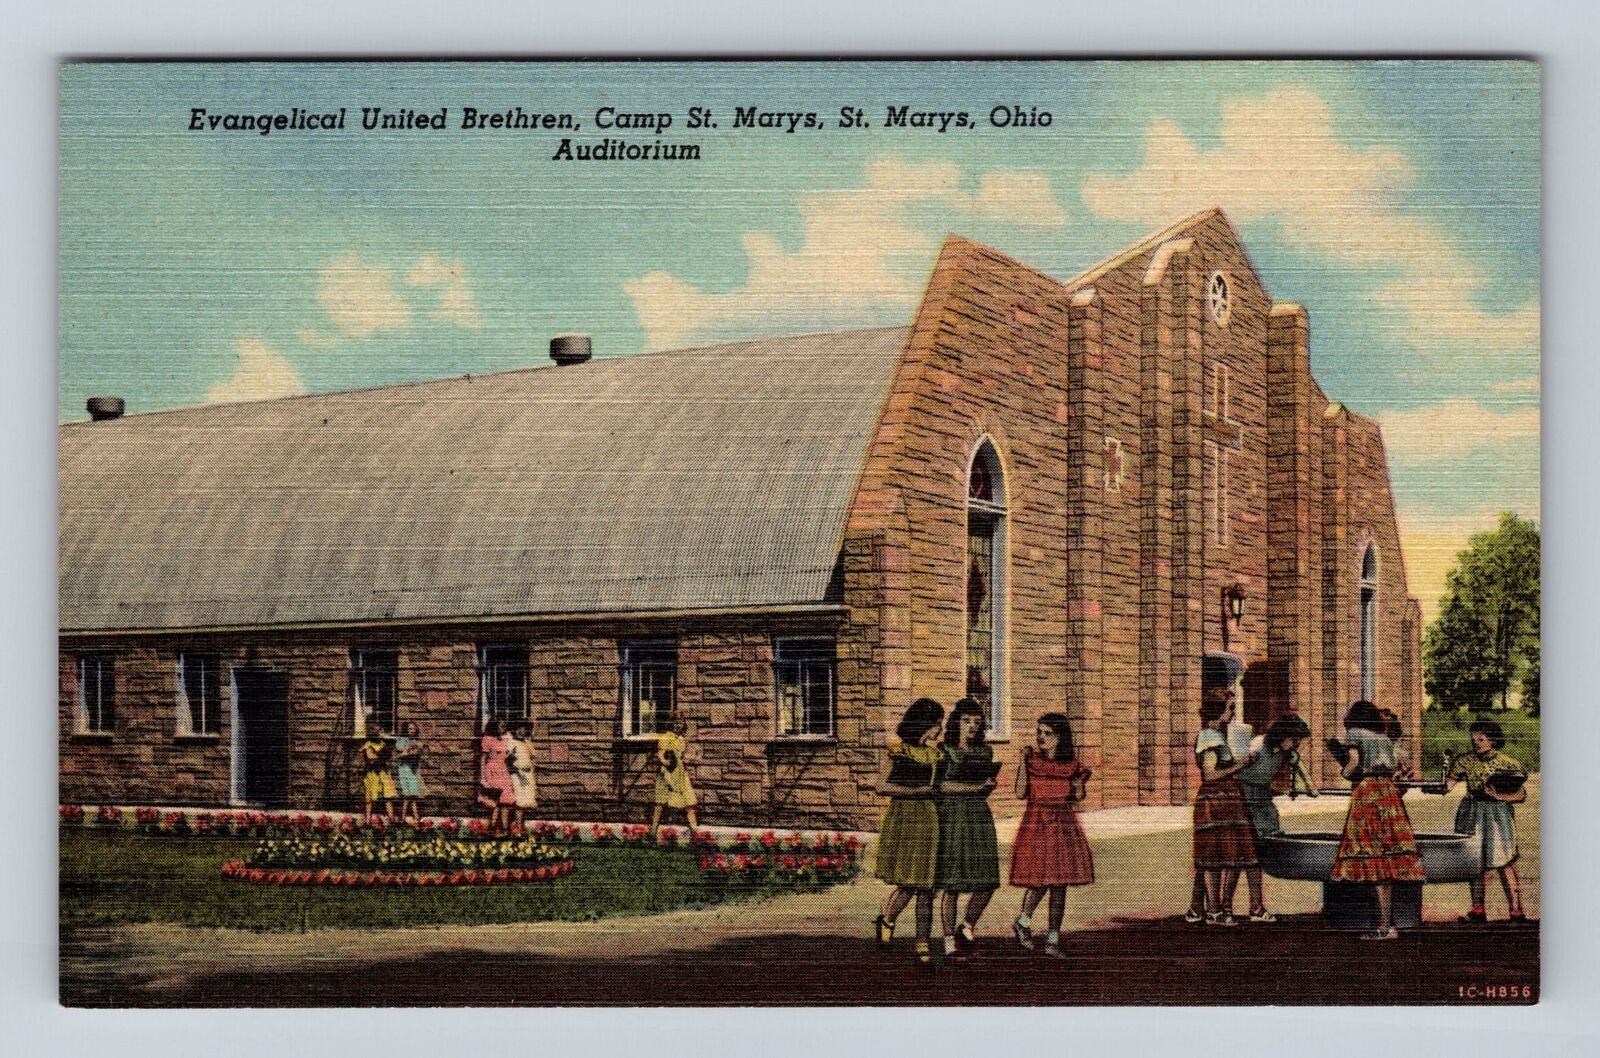 St Mary\'s OH-Ohio, Evangelical United Brethren, Camp St Mary\'s, Vintage Postcard